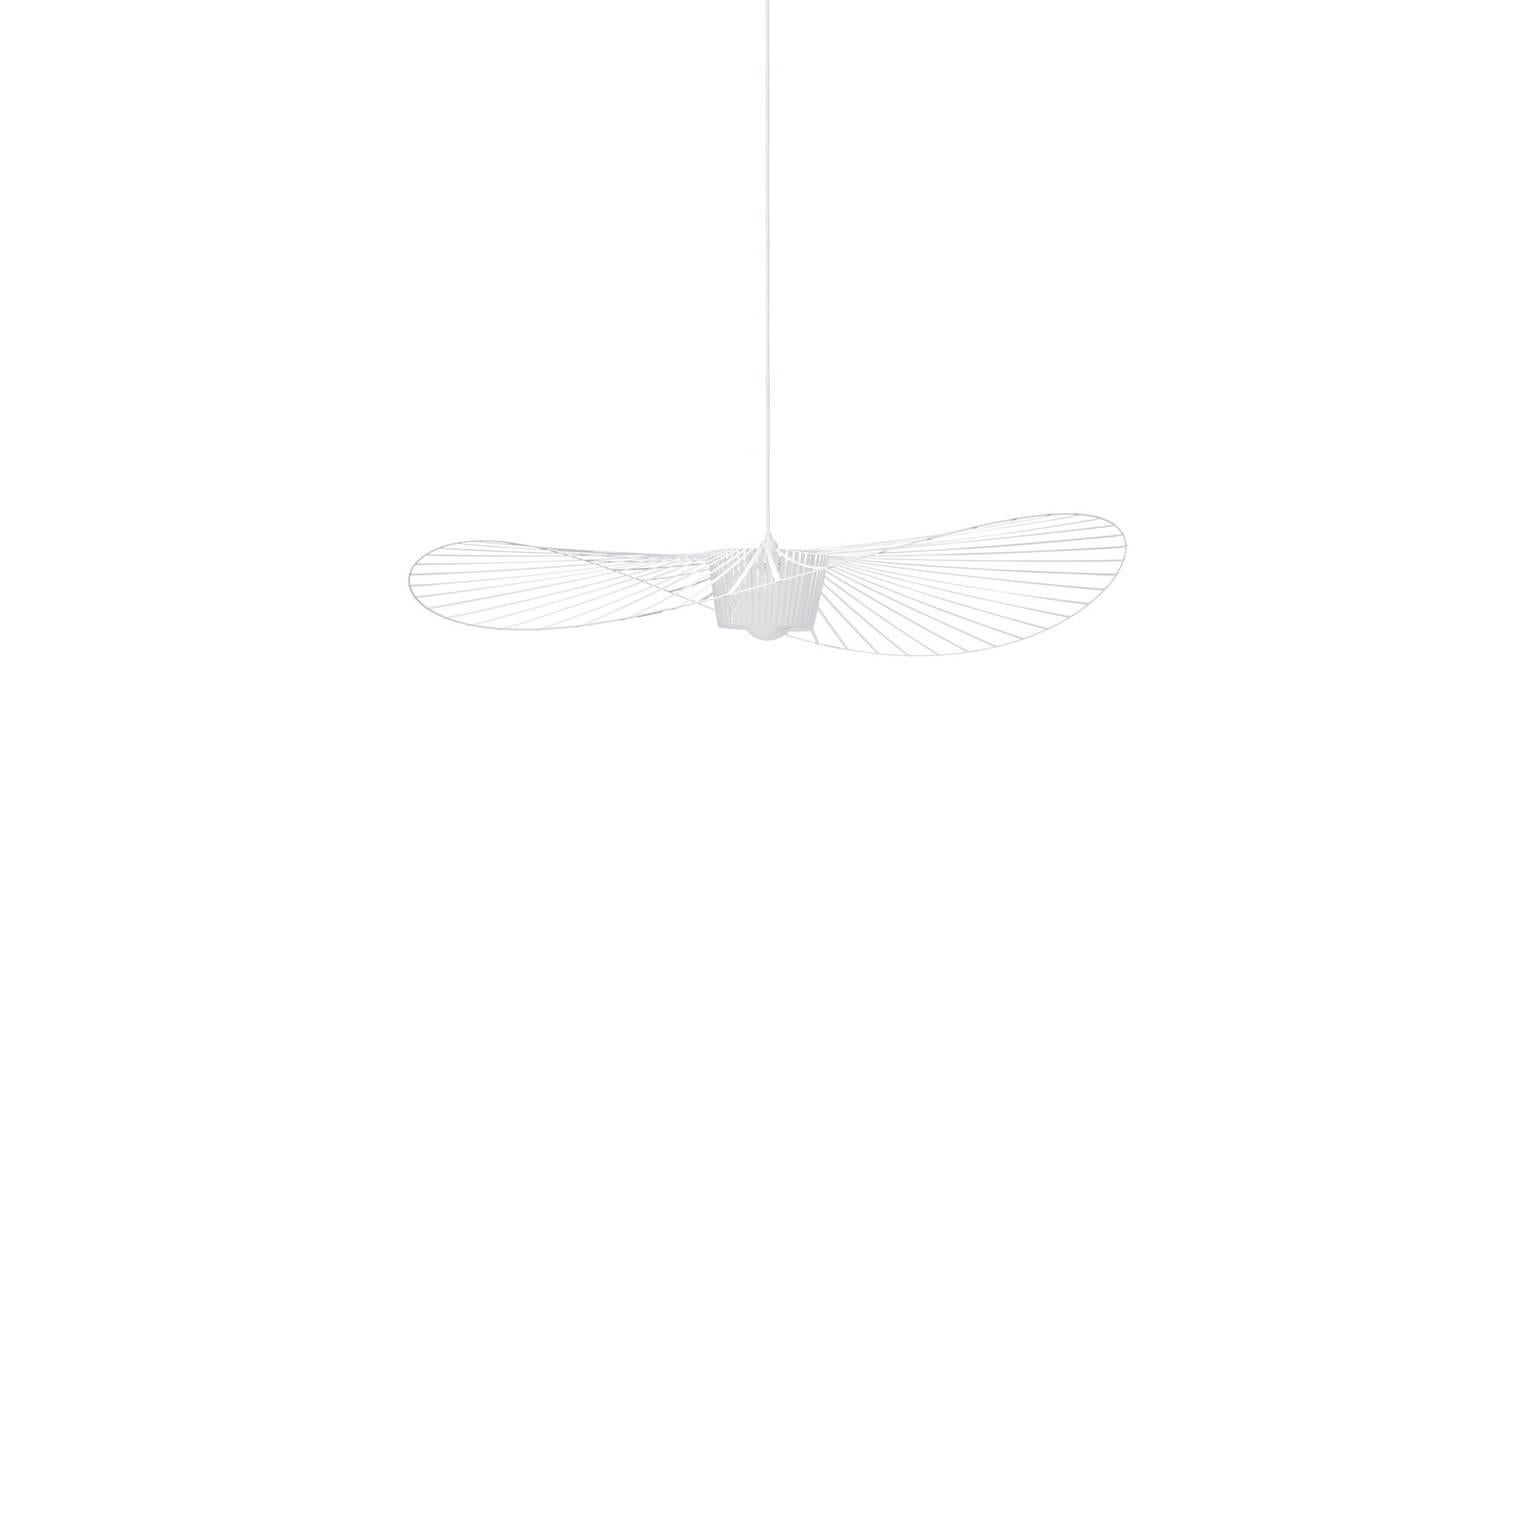 Ceiling light made of structured lightweight fiberglass and polyurethane ribbons. Lead time 6-8 weeks when not in stock. Also available in white, teal and copper. Comes in 55 inch and 78 inch diameters. Overall height can be adjusted. 220-240 V